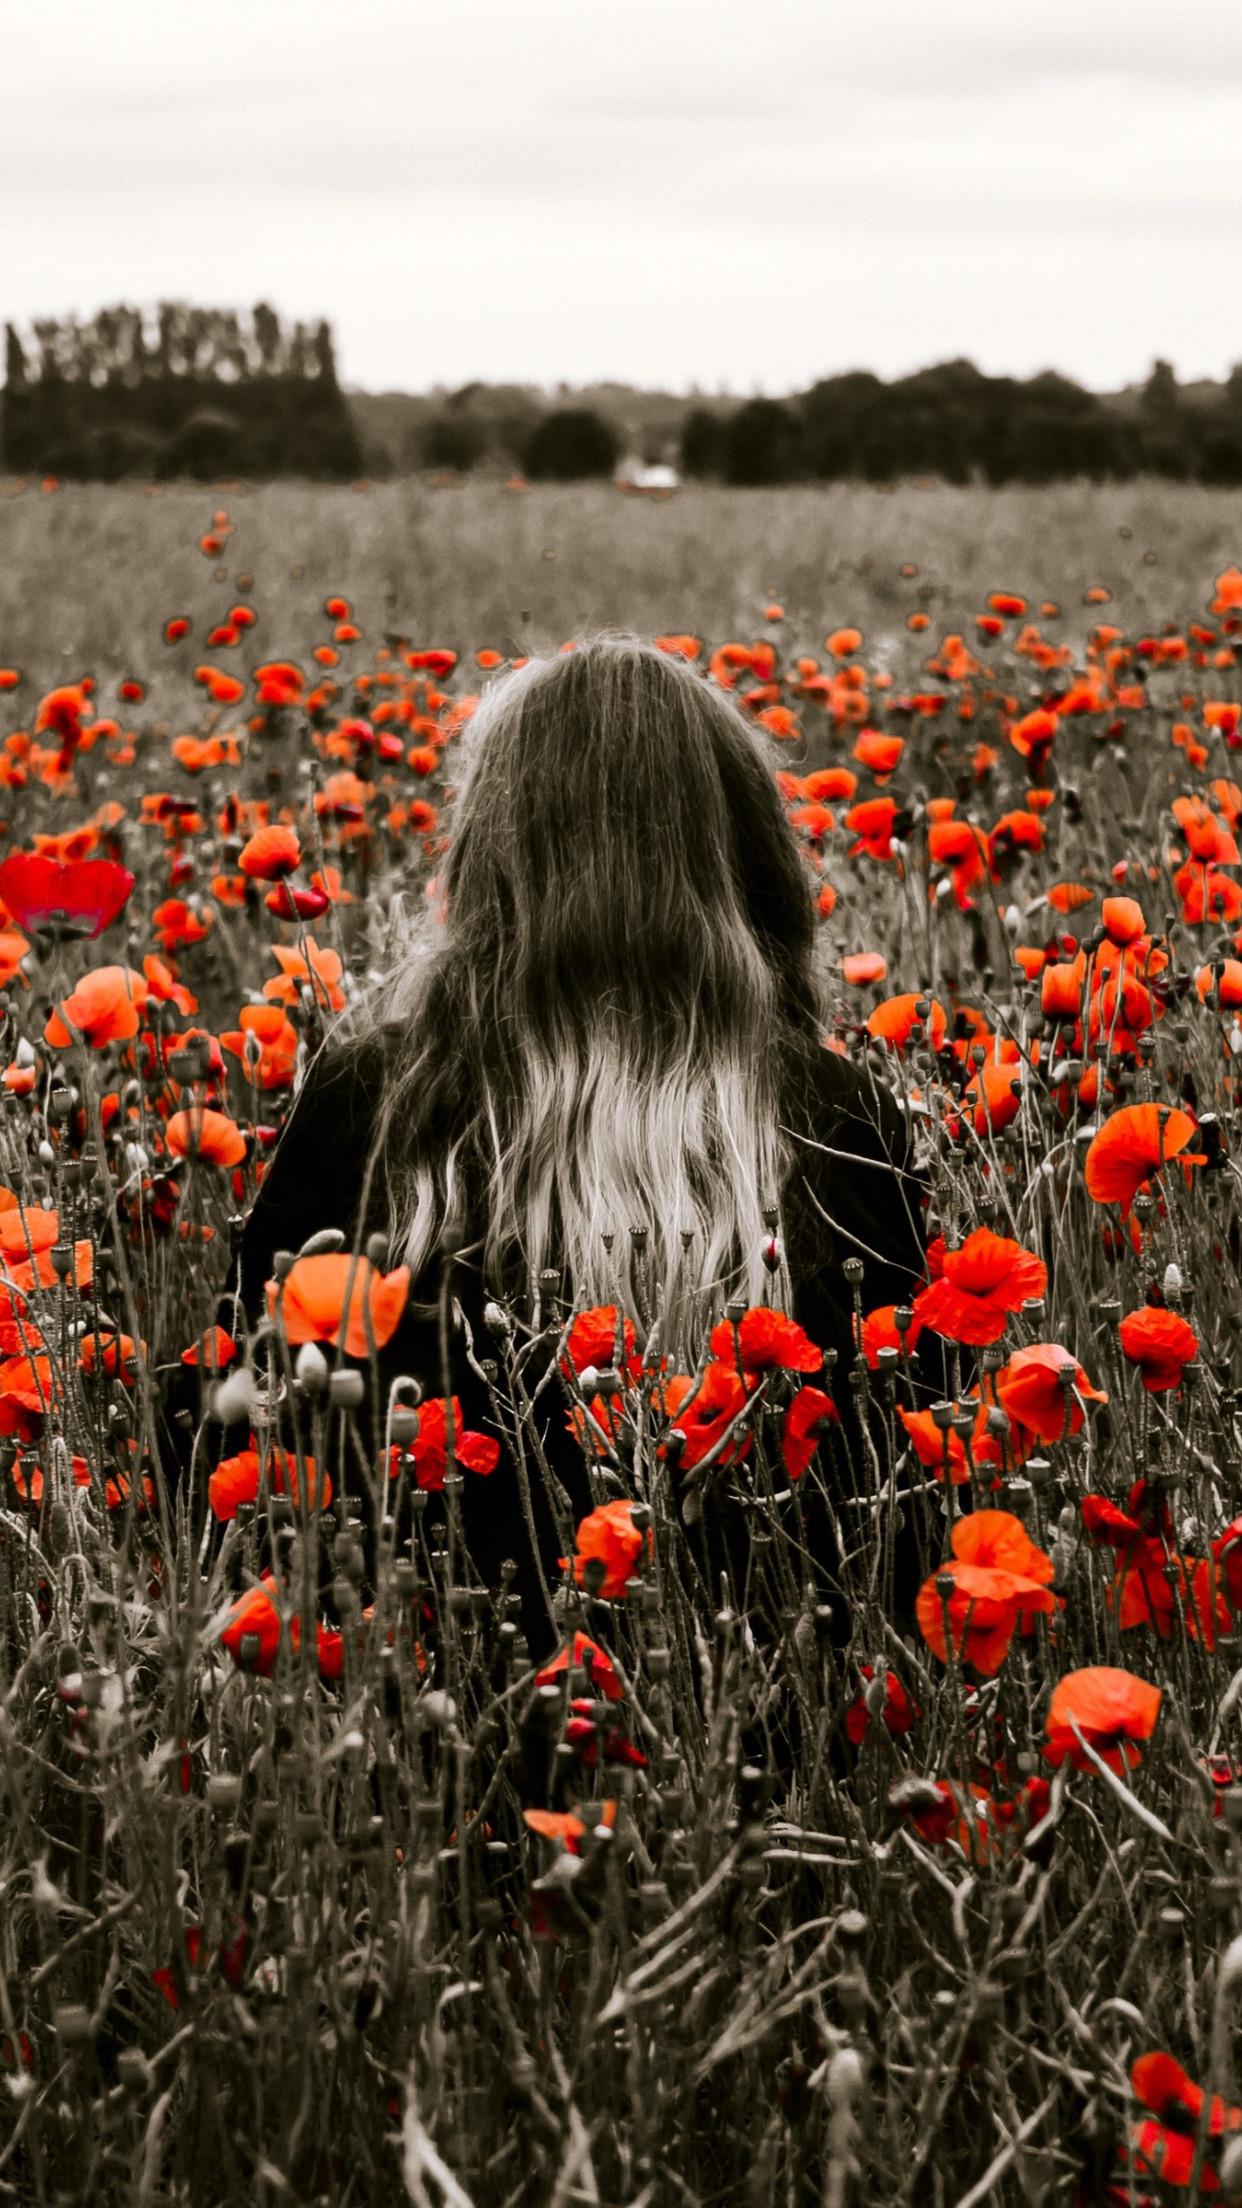 Girl in the field with red poppies wallpaper 1242x2208